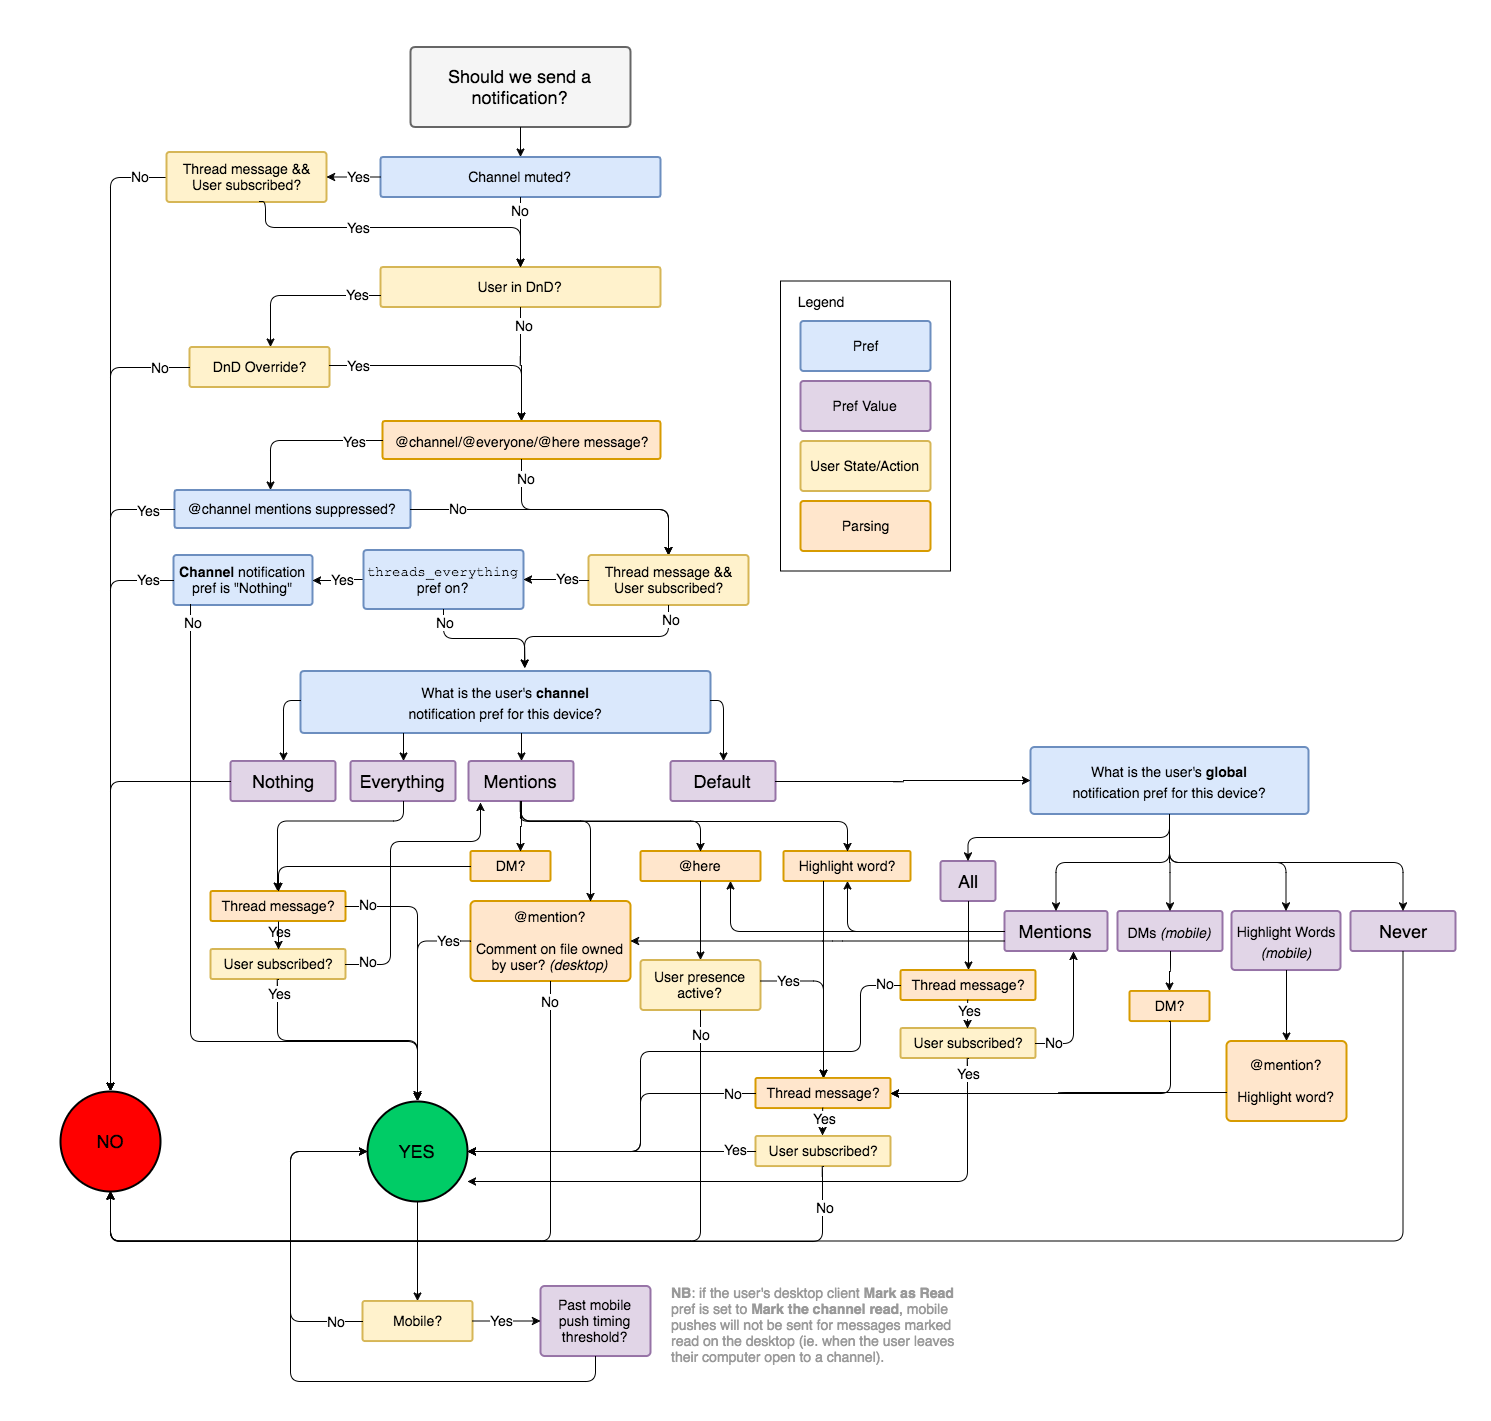 A large, complex flowchart, starting with 'Should we send a notification?', branching through 35 different decision points, and ending with 'YES' or 'NO'.